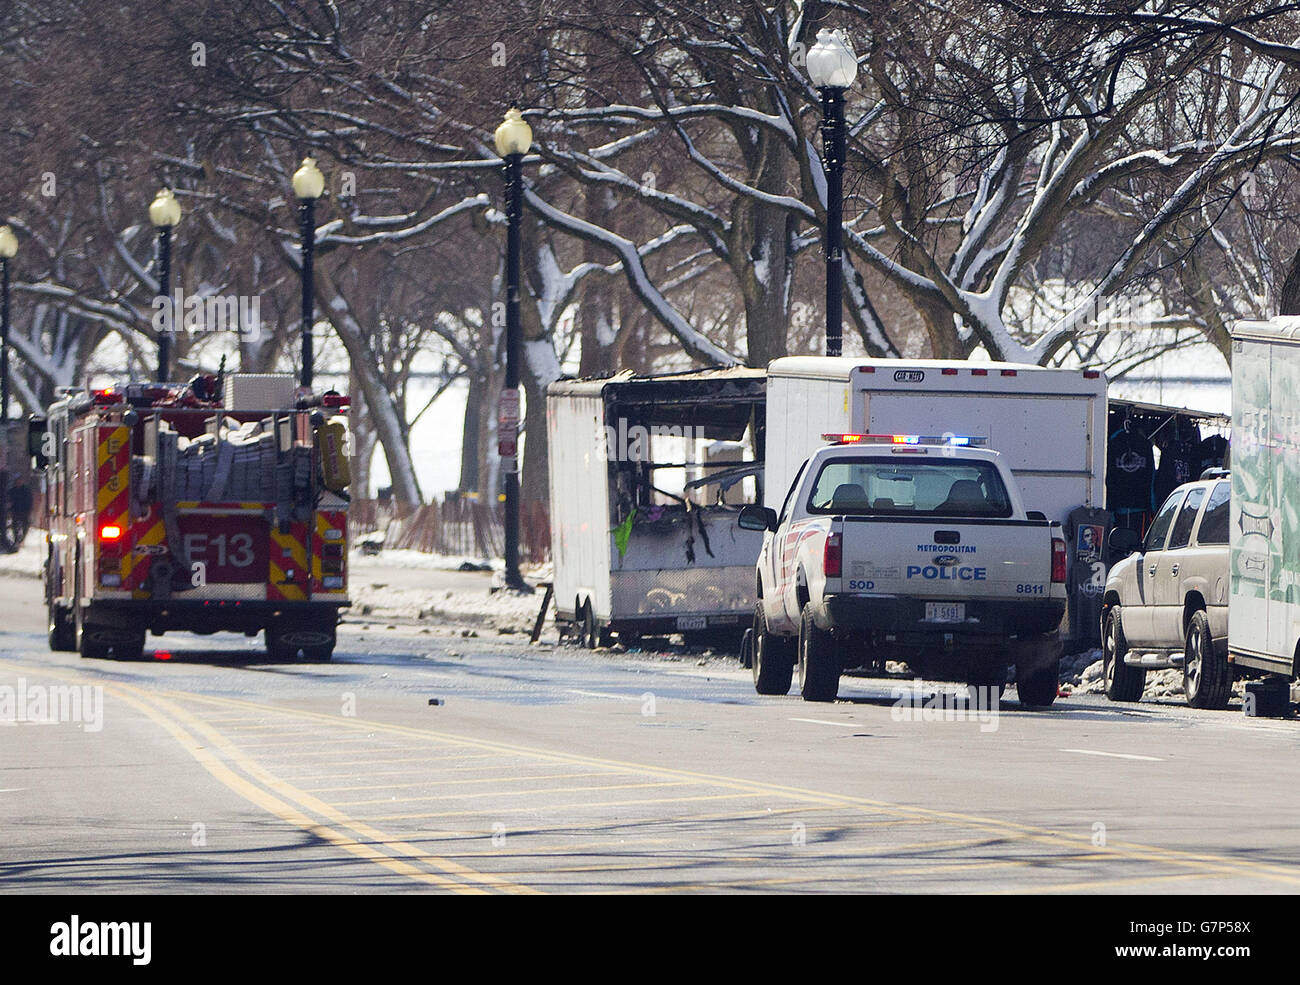 Police and fire vehicles are seen along 15th street NW near the White House, near a vendor cart that caught on fire Saturday, March 7, 2015 in Washington. Secret Service spokesman Brian Leary says a vendor cart caught fire around 10 a.m. at 15th and G streets. He says firefighters responded and contained the blaze. The fire delayed the departure of President Barack Obama and the first family who are traveling to Selma, Ala., to help commemorate the 50th anniversary of 'Bloody Sunday.' (AP Photo/Pablo Martinez Monsivais) Stock Photo